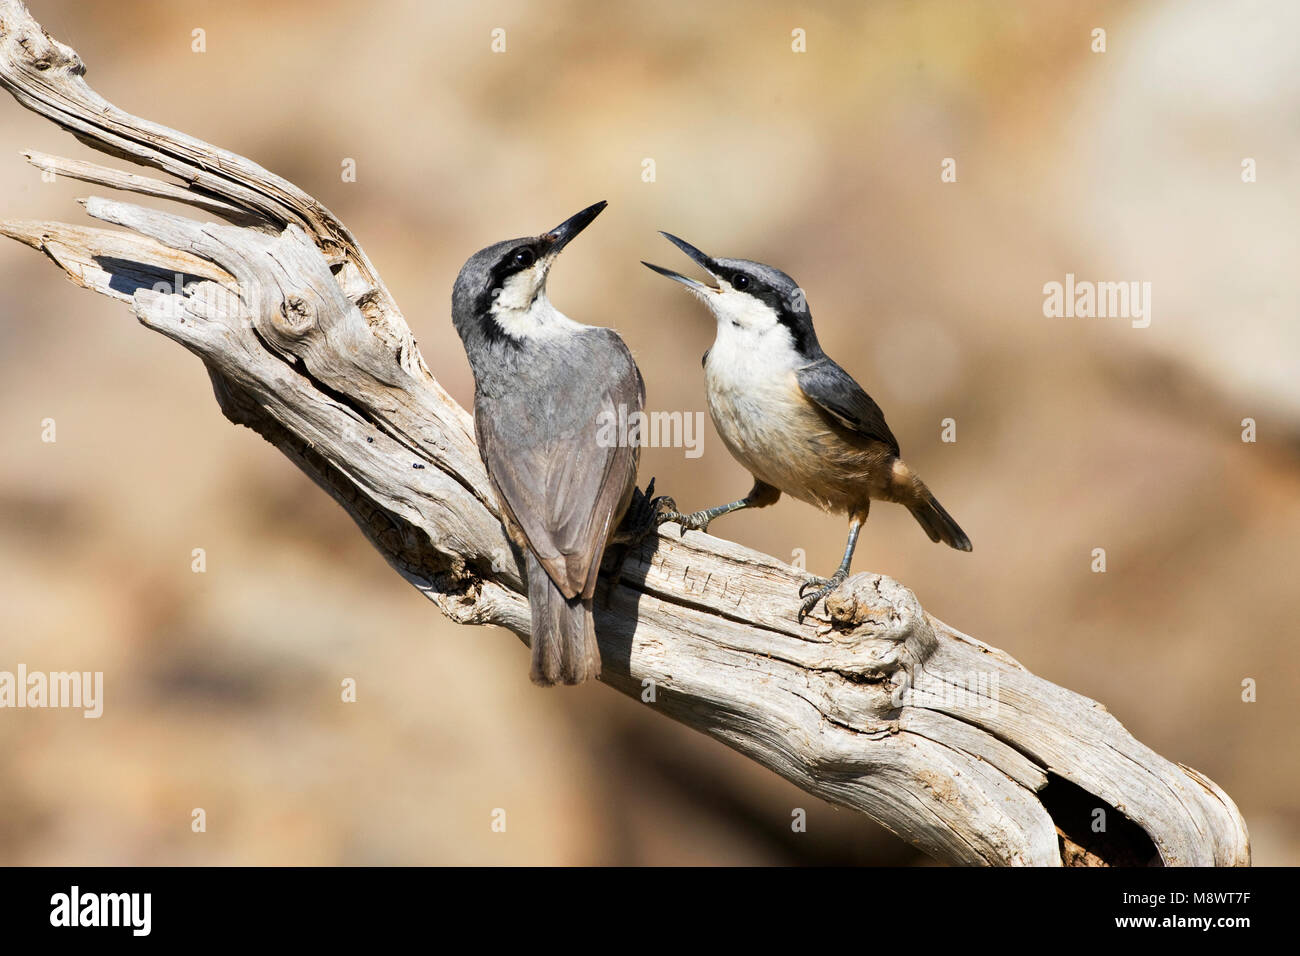 Paartje Rotsklevers op stronk; coppia di roccia occidentale Nuthatches sul log Foto Stock